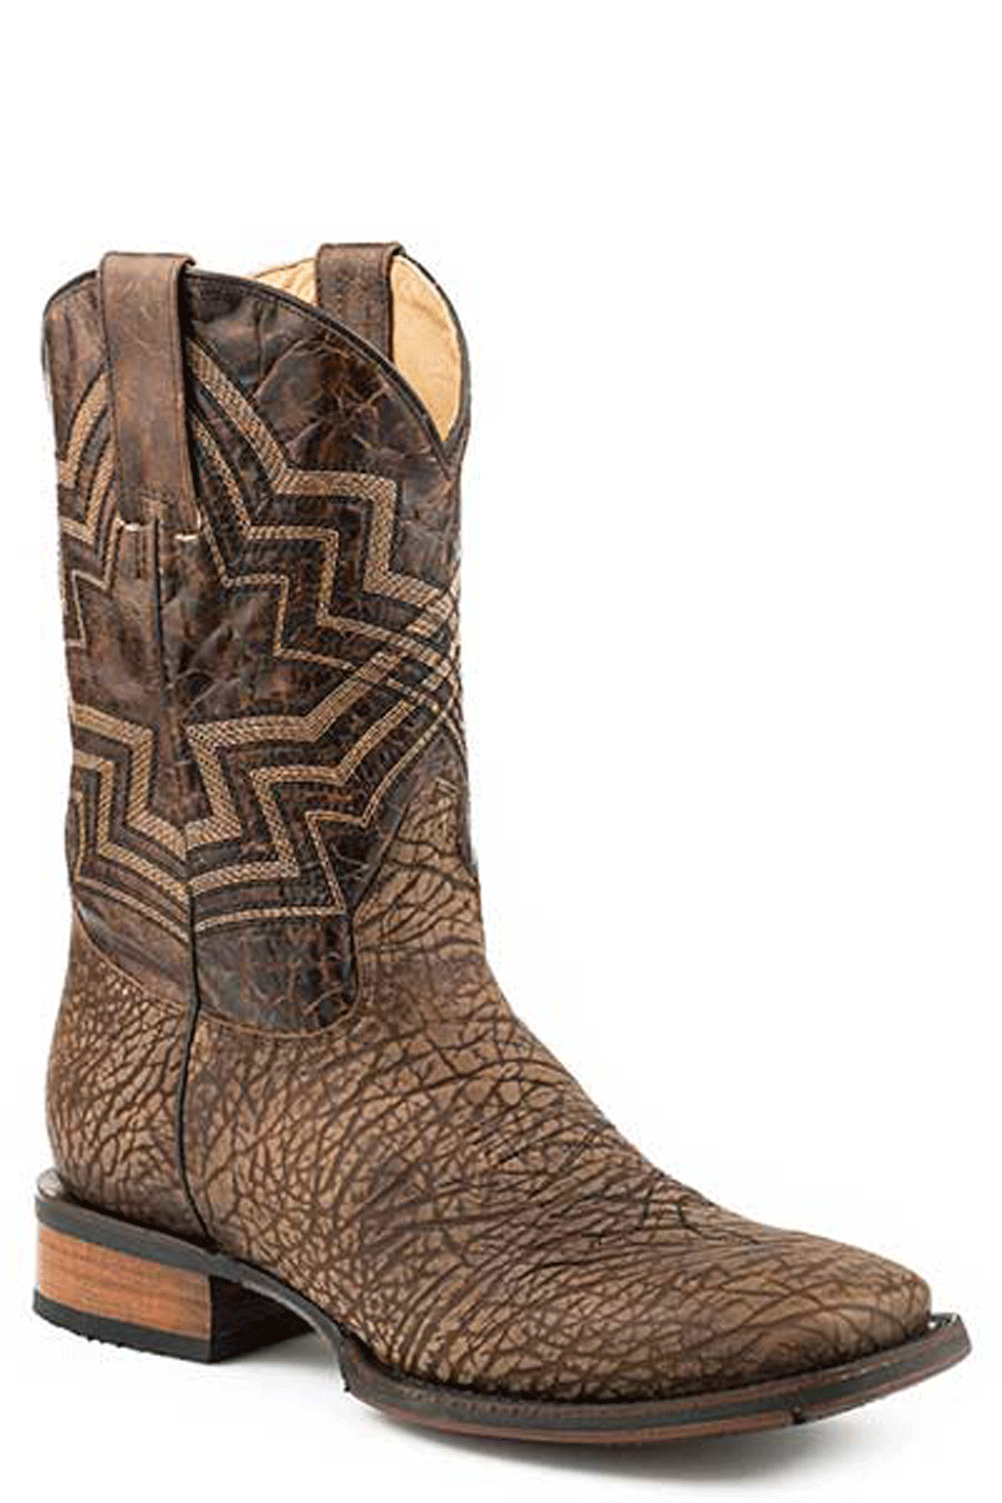 Stetson X-Impact Bull Hide Square Toe Hank Cowboy Boot | Renegade Stores